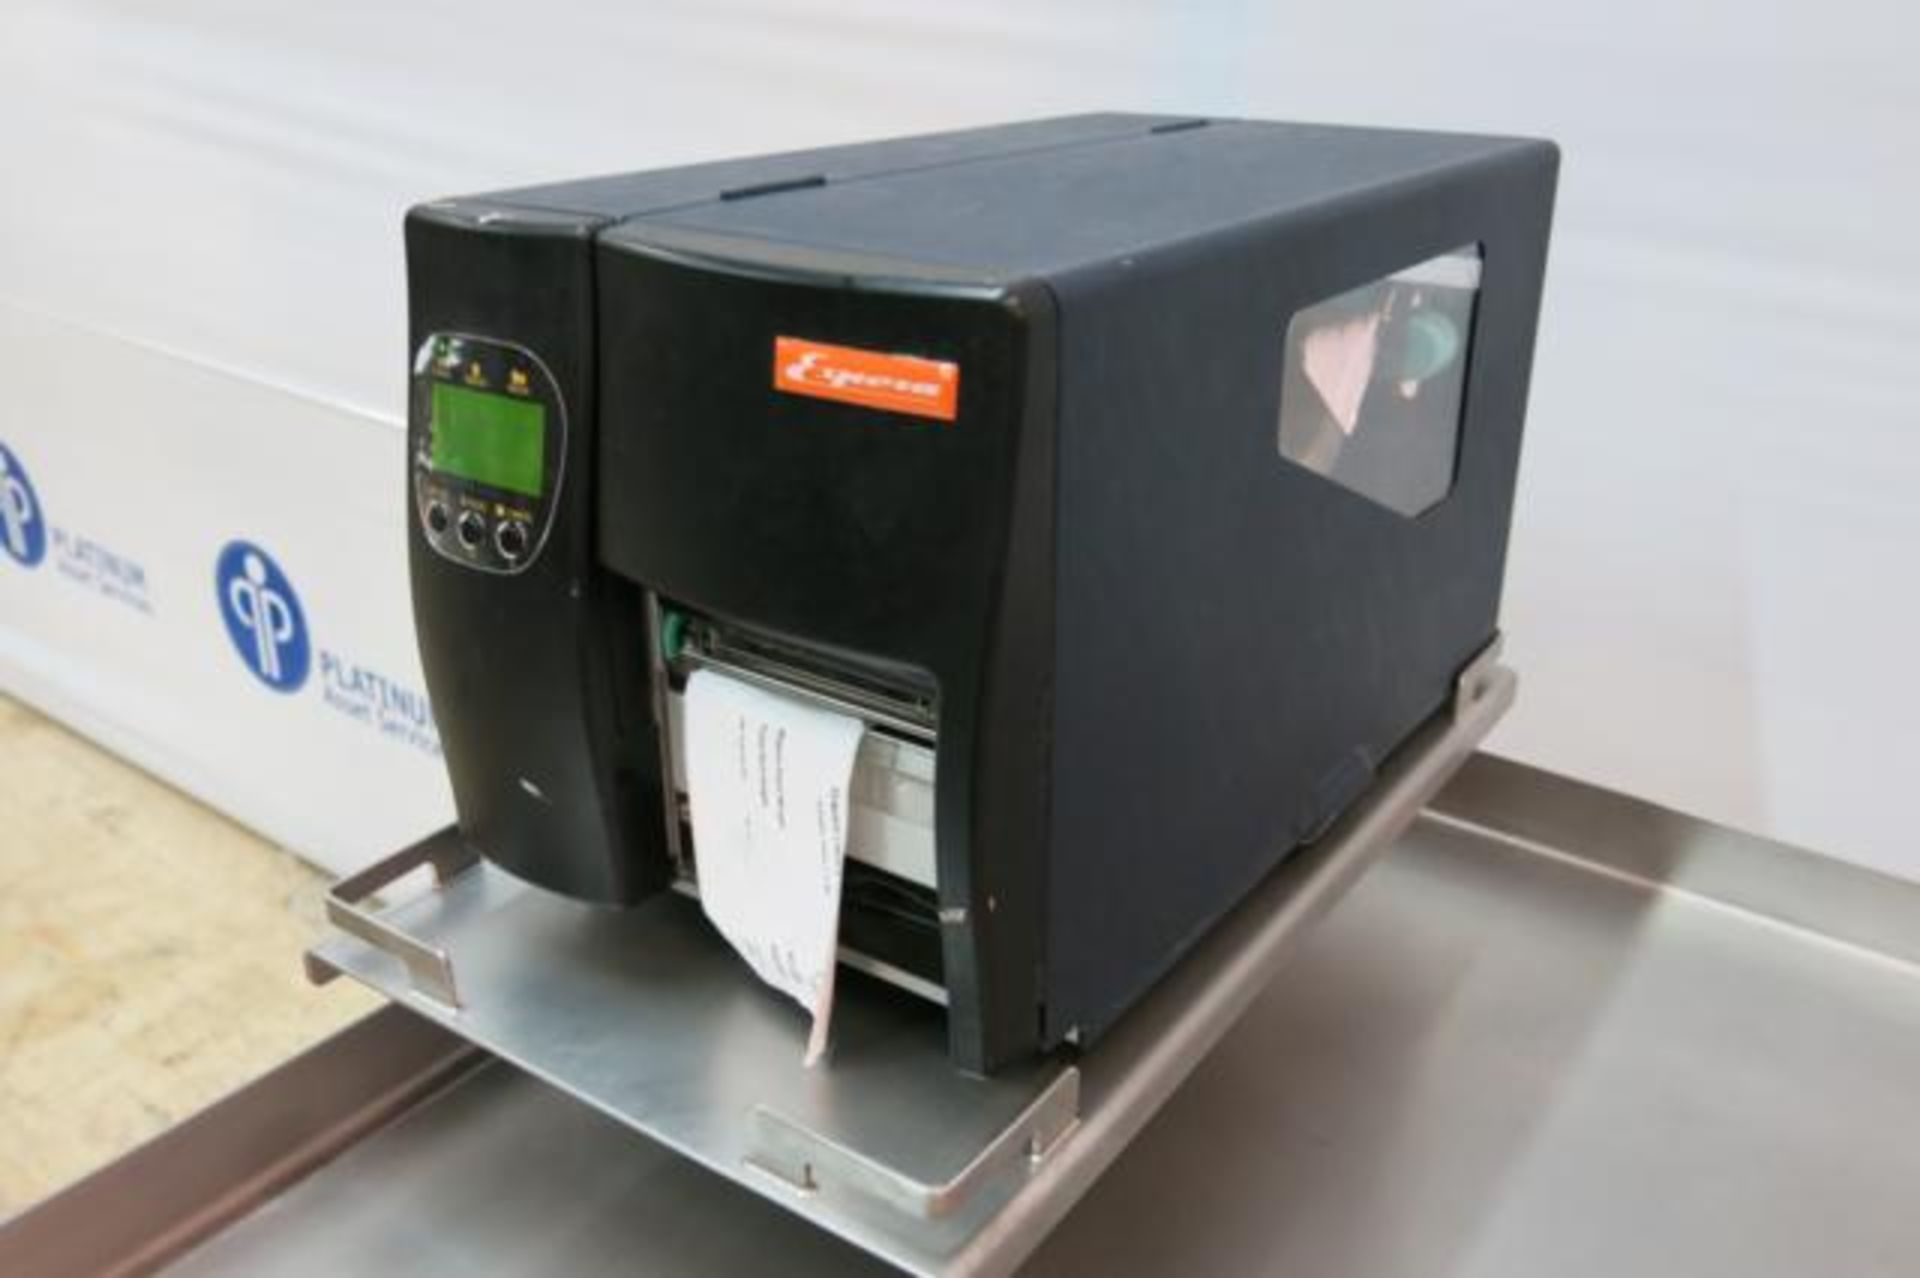 ESPERA, ESD 234, THERMAL TRANSFER PRINTER, S/N 263 01 01100 WITH STAINLESS STEEL TABLE - Image 2 of 7